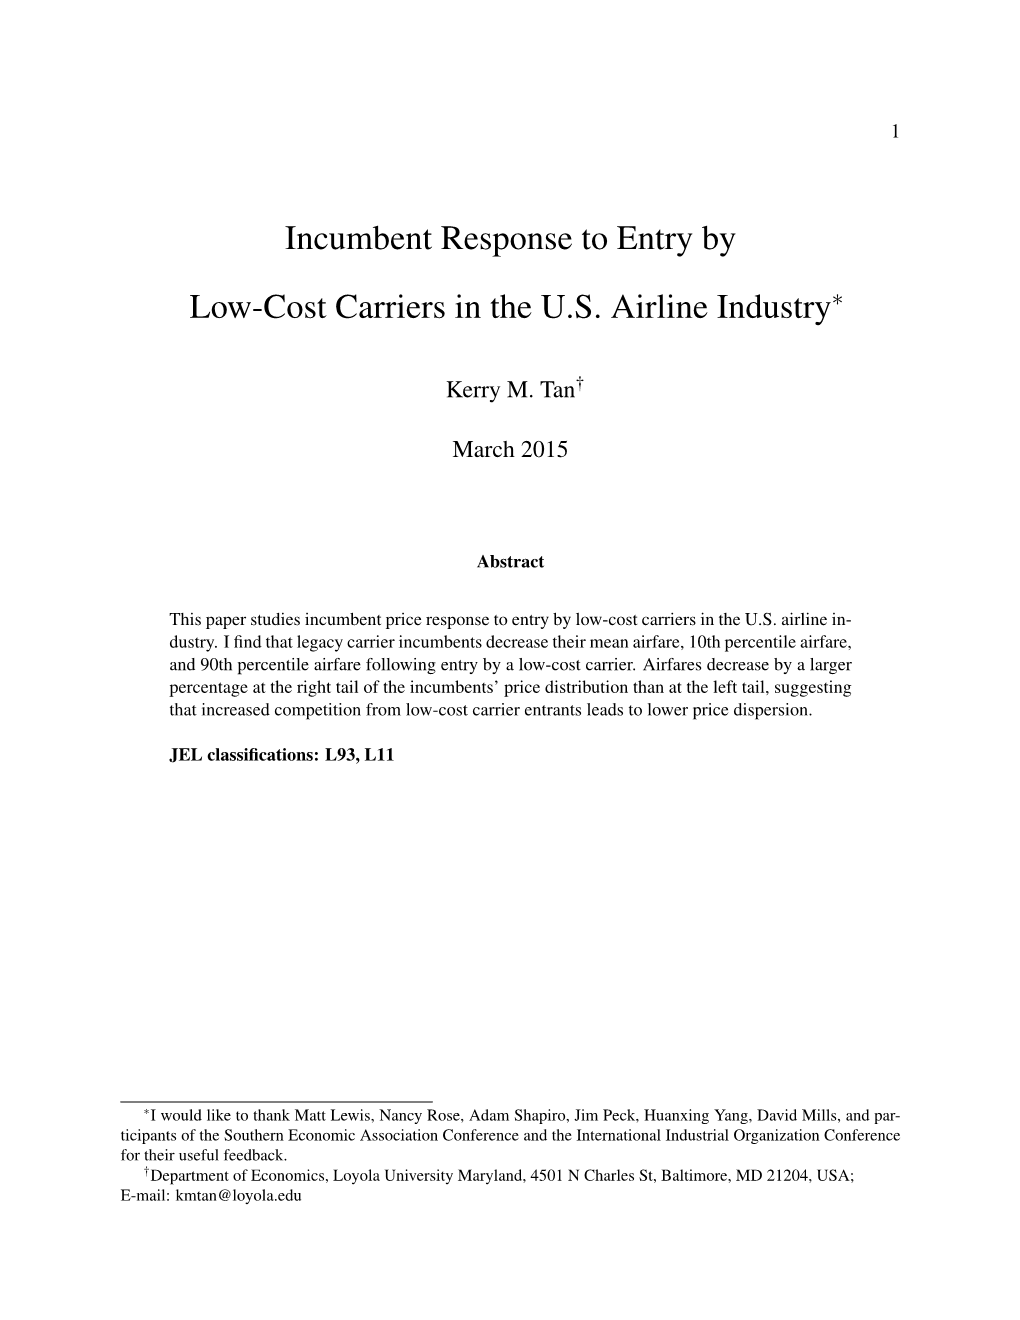 Incumbent Response to Entry by Low-Cost Carriers in the U.S